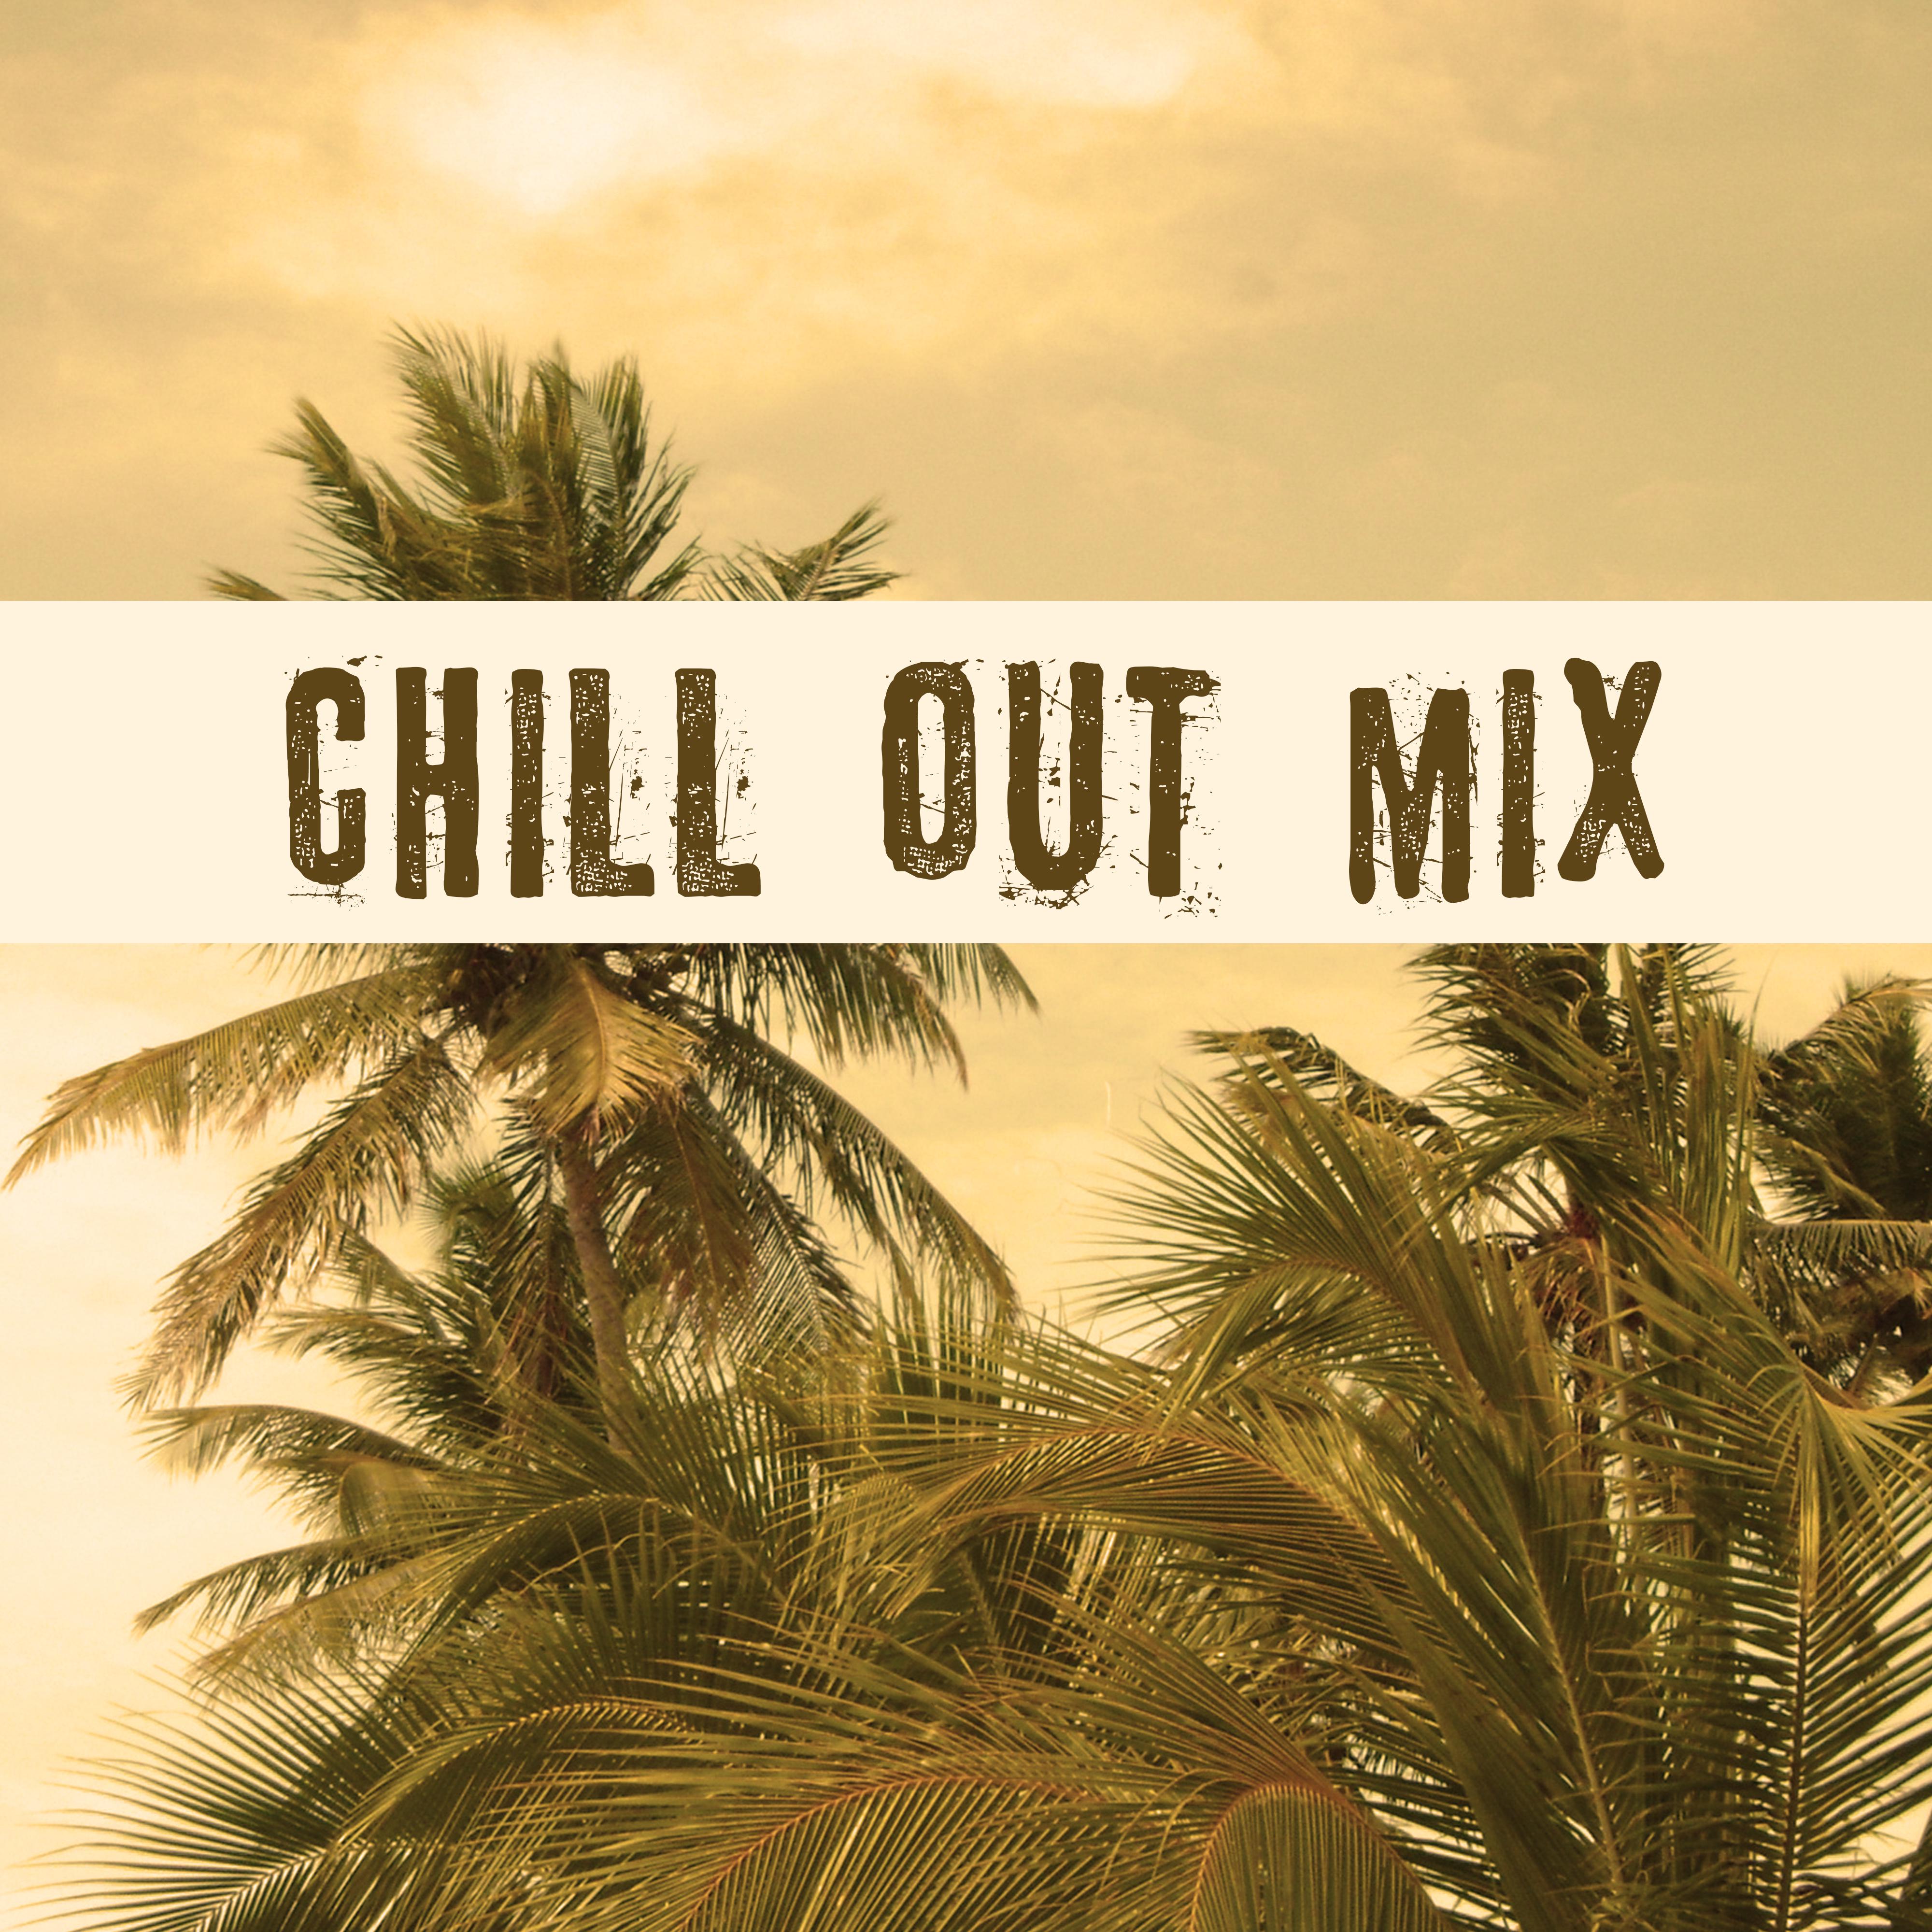 Chill Out Mix – Lounge Ambient, Best Chill Out Music, Pure Relaxation, Asian Chill, Barcelona Chill Out, Ibiza Lounge, Sounds of Sea